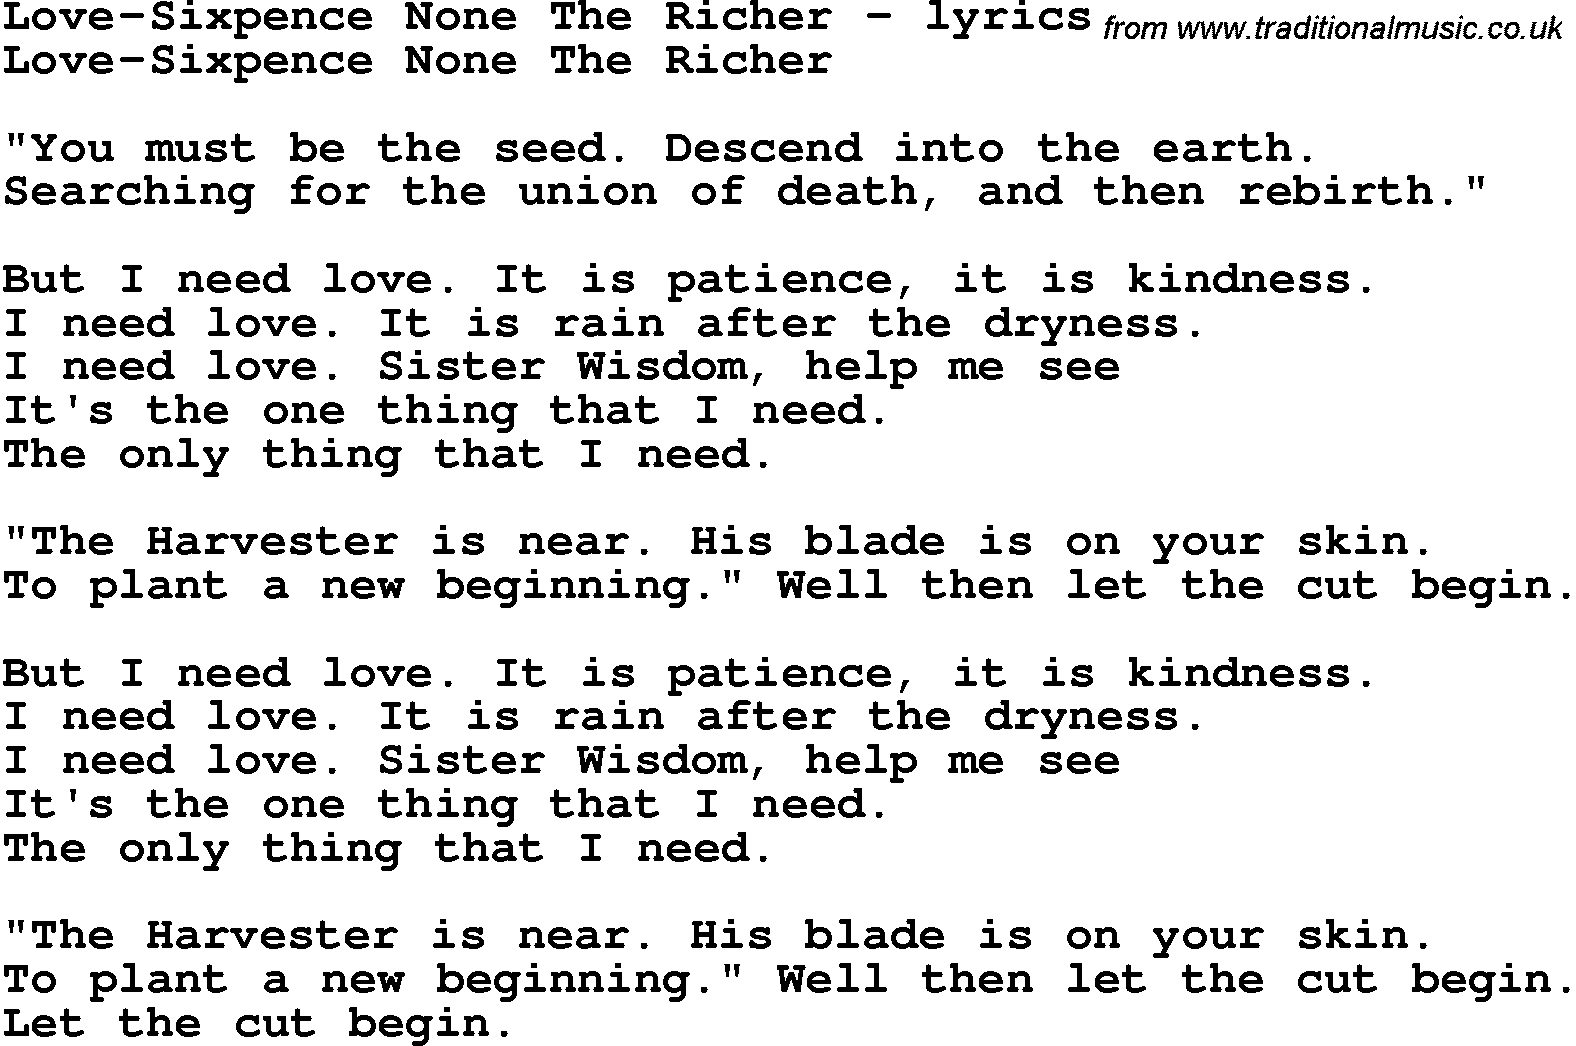 Love Song Lyrics for: Love-Sixpence None The Richer